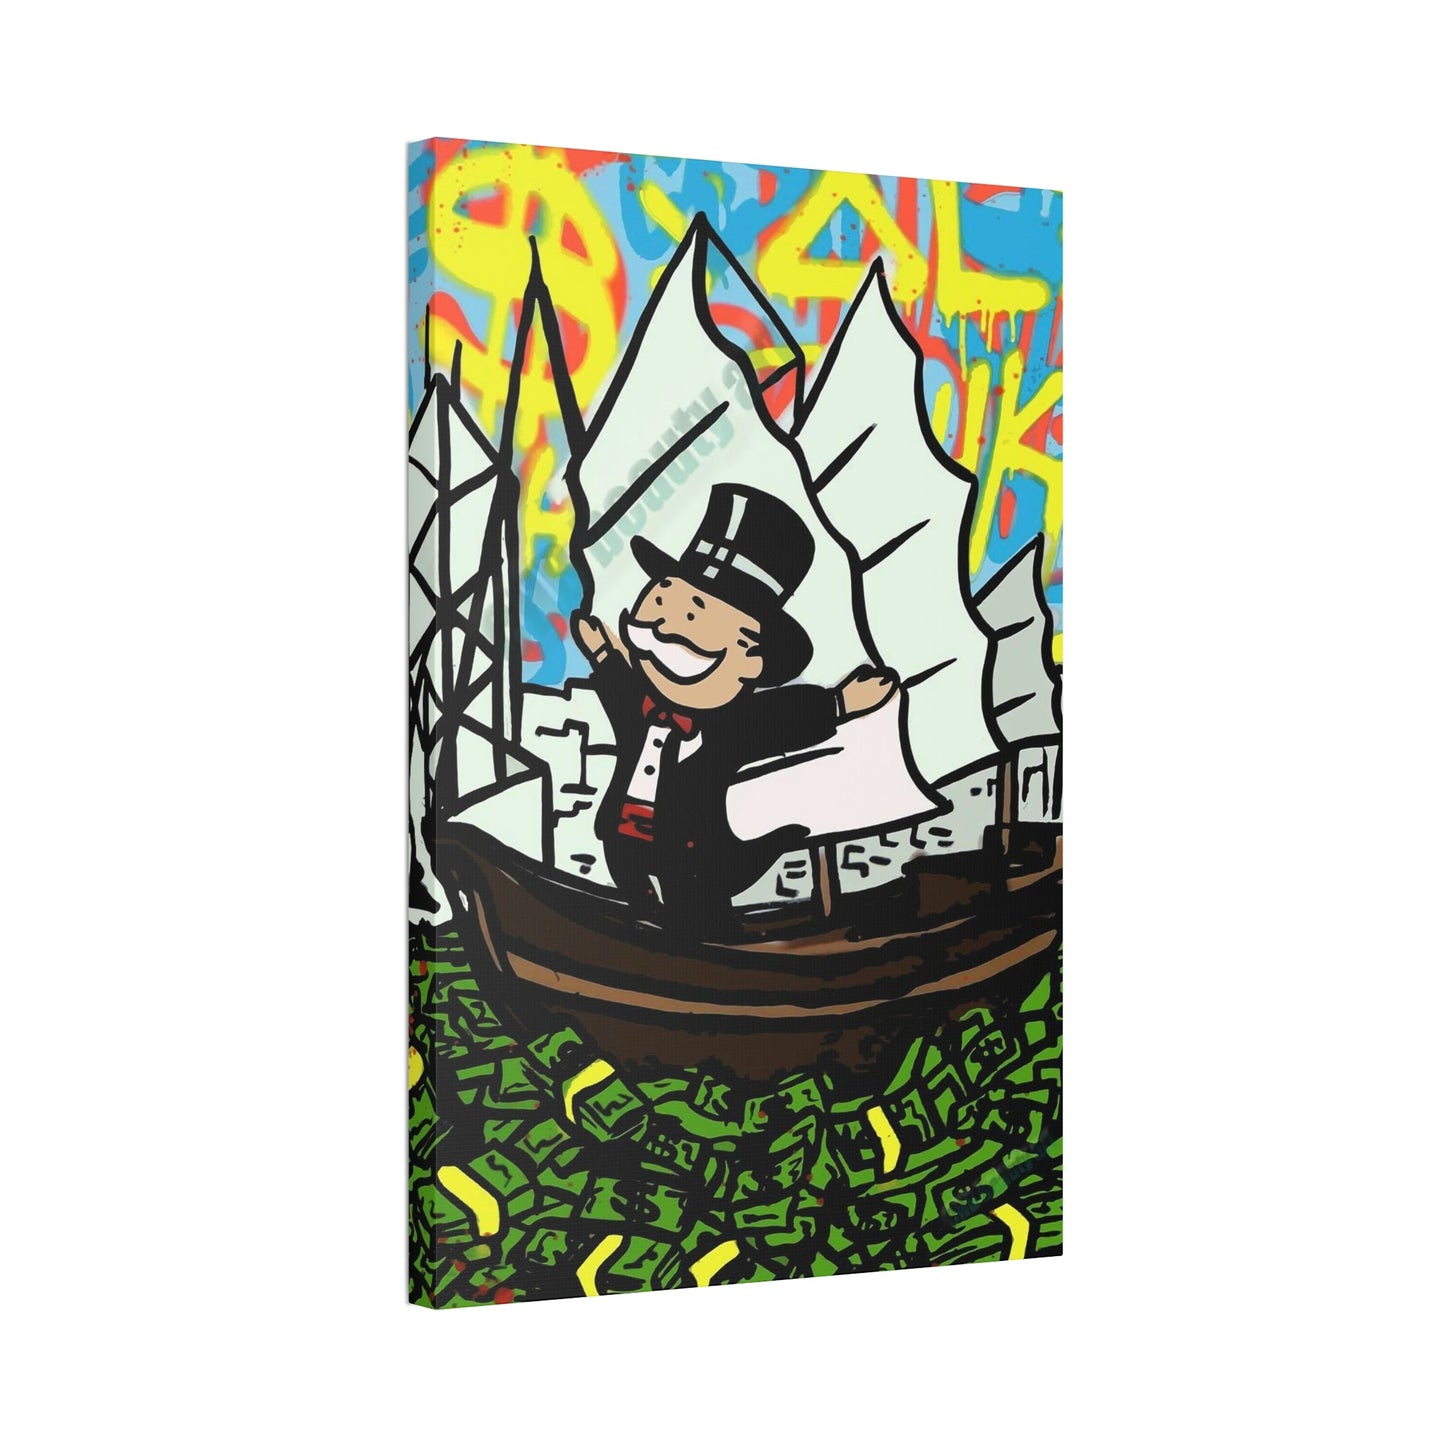 Playful Creativity: Artful Canvas and Poster Print of Alec Monopoly's Art